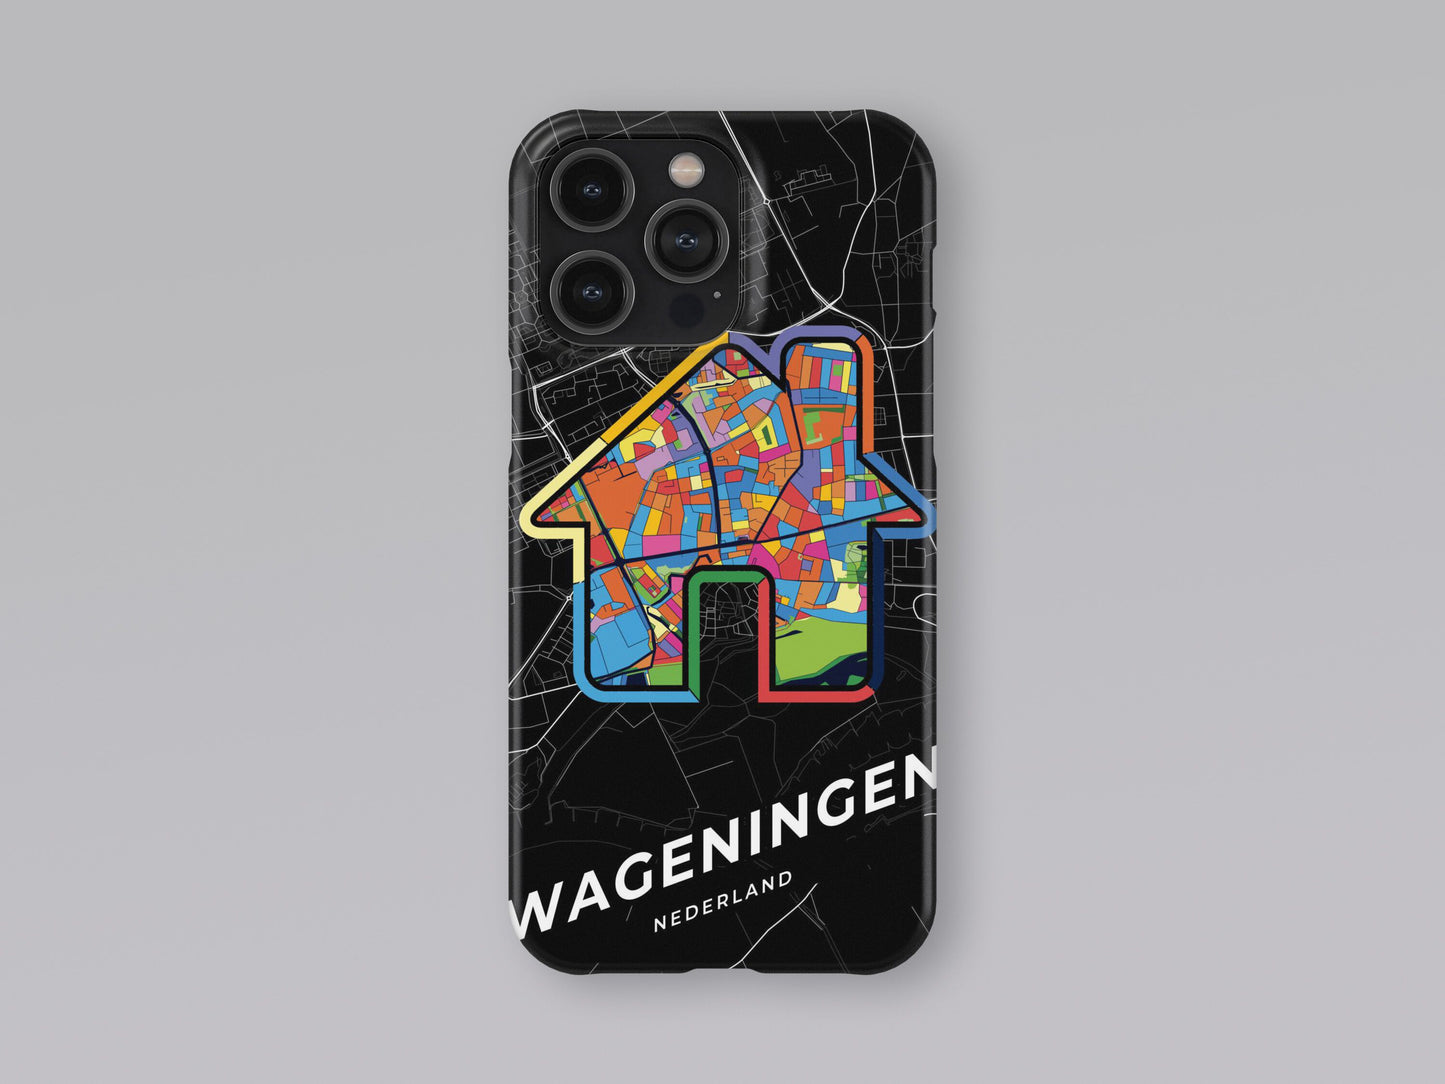 Wageningen Netherlands slim phone case with colorful icon 3